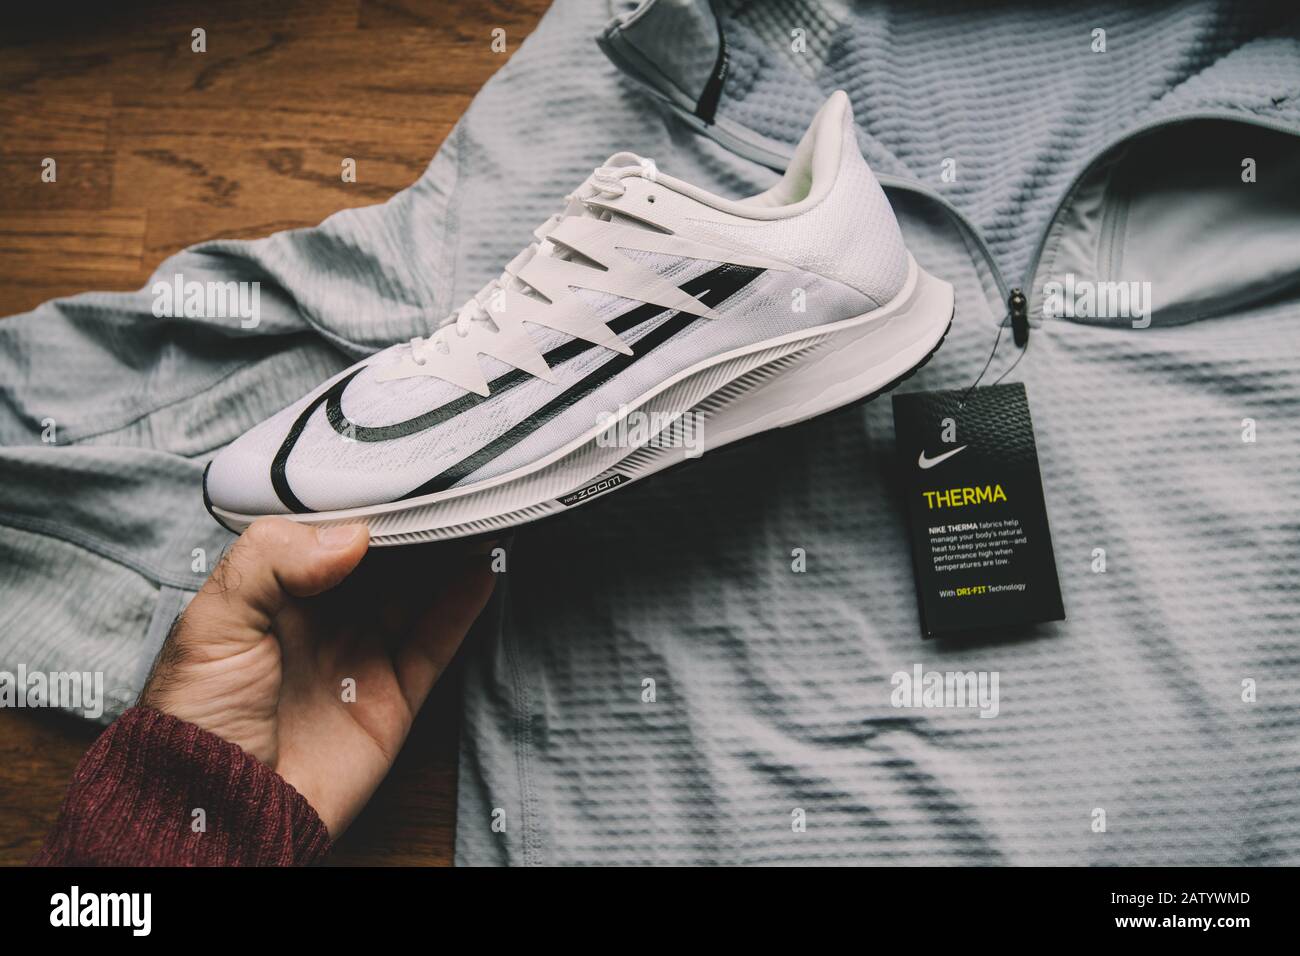 Paris, France - Sep 23, 2019: POV man hand holding Nike Zoom Rival Fly  professional running shoes for women with Nike Derma Dry-Fit clothes in  background Stock Photo - Alamy